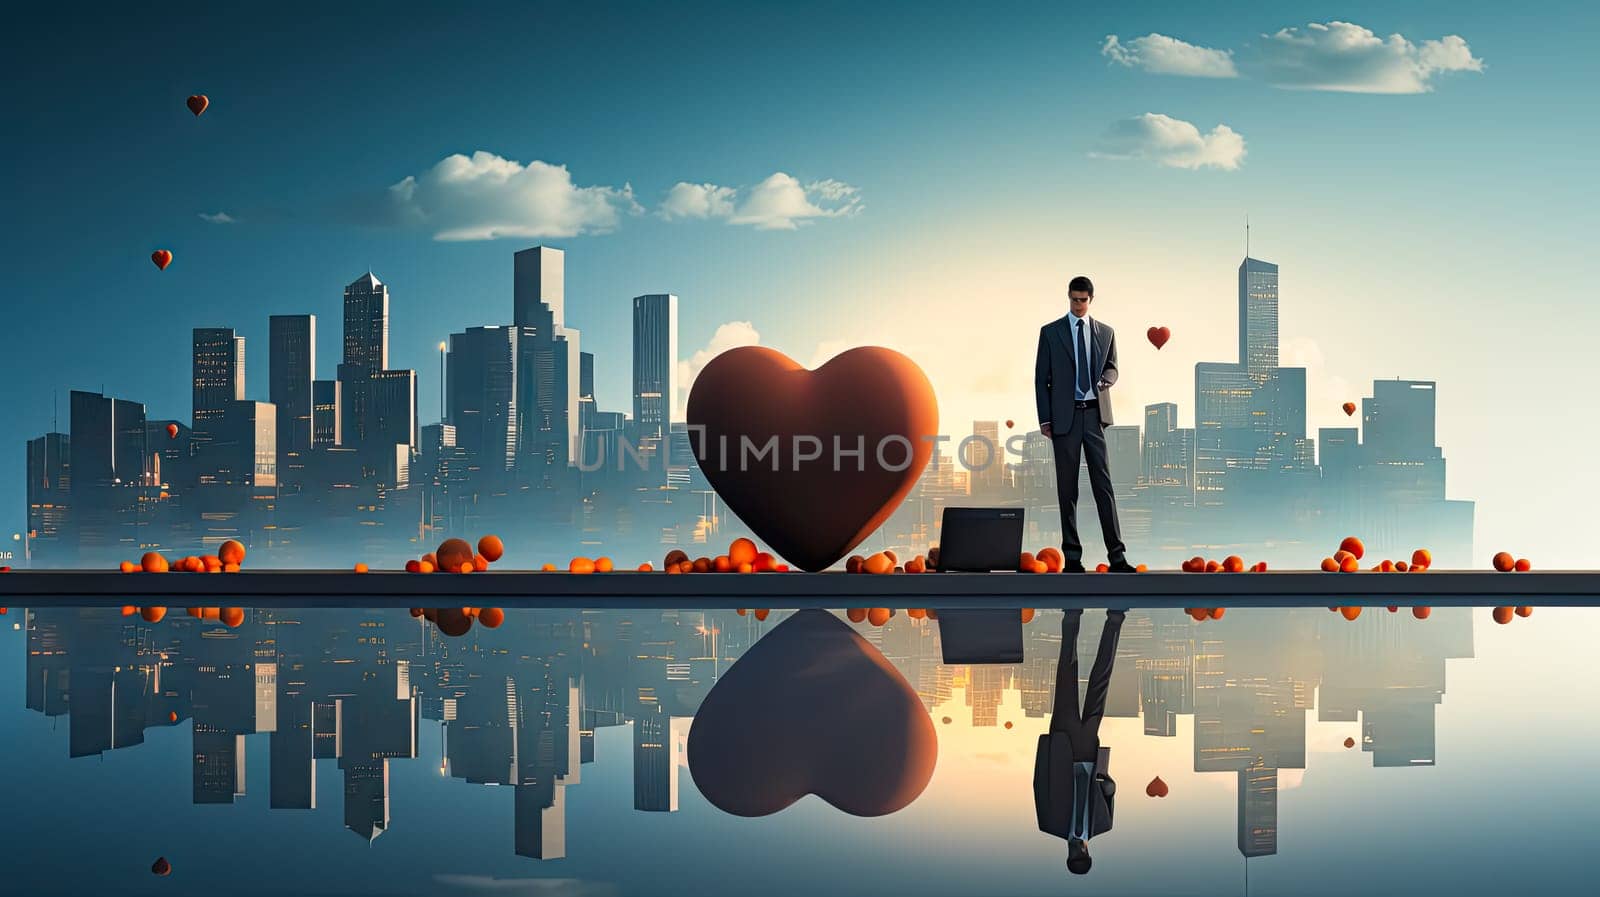 Celebrate love in style with a businessman in a suit against a background of hearts. by Alla_Morozova93